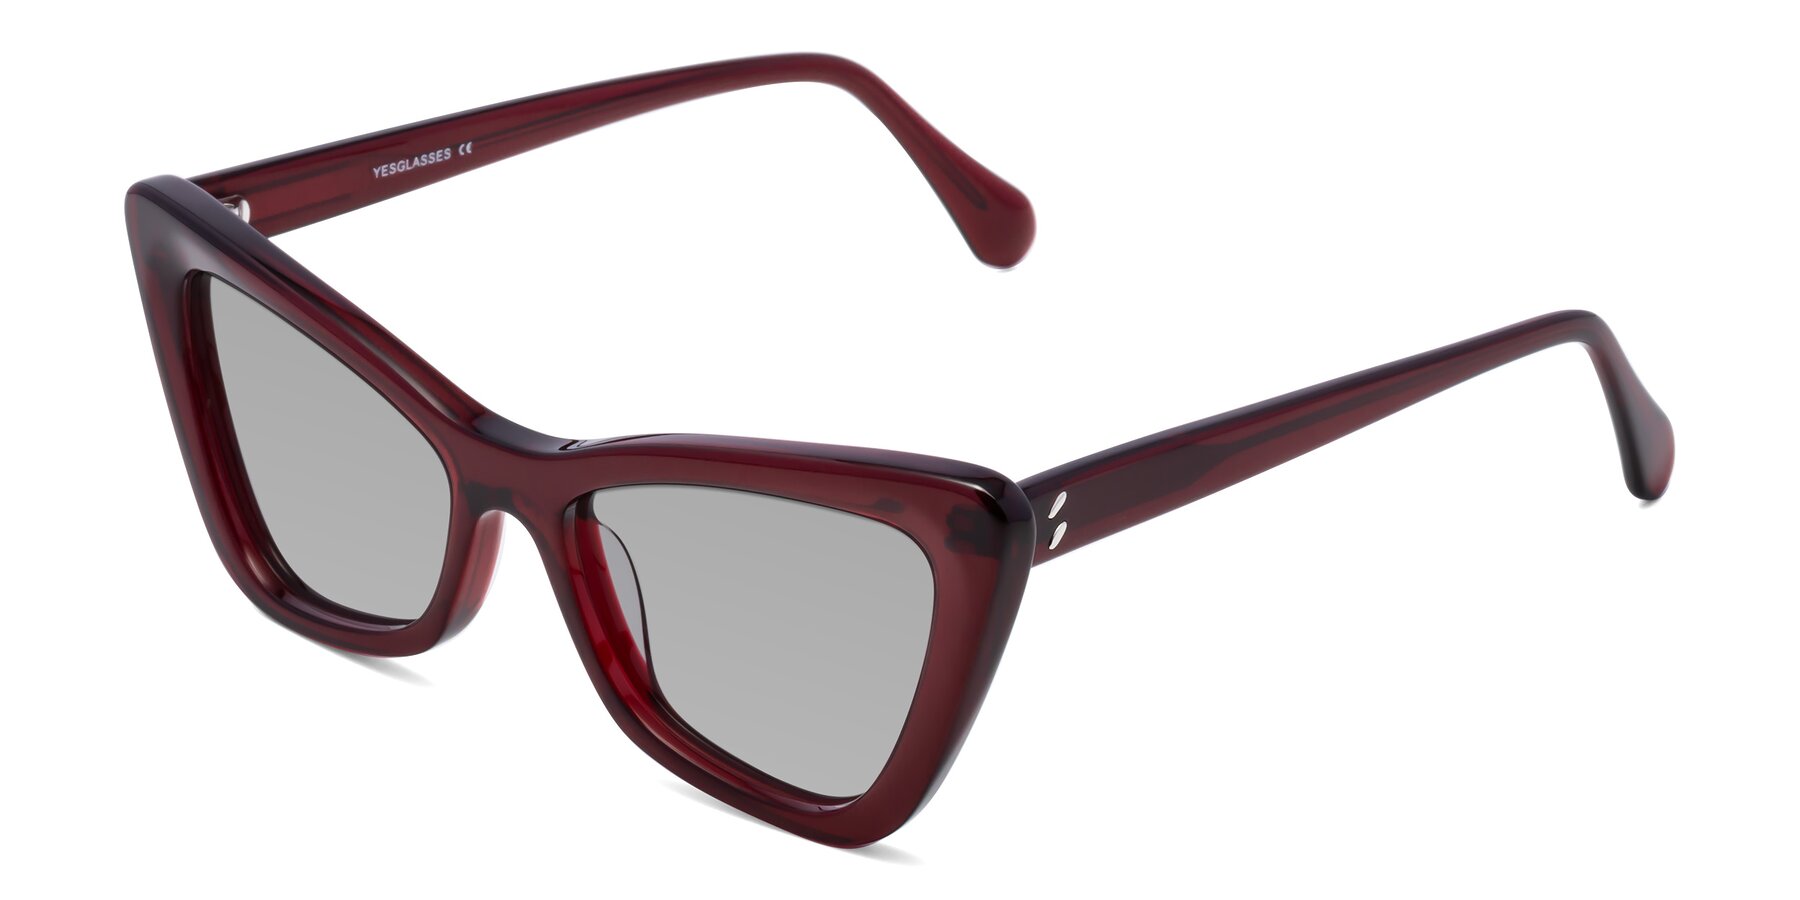 Angle of Rua in Wine with Light Gray Tinted Lenses